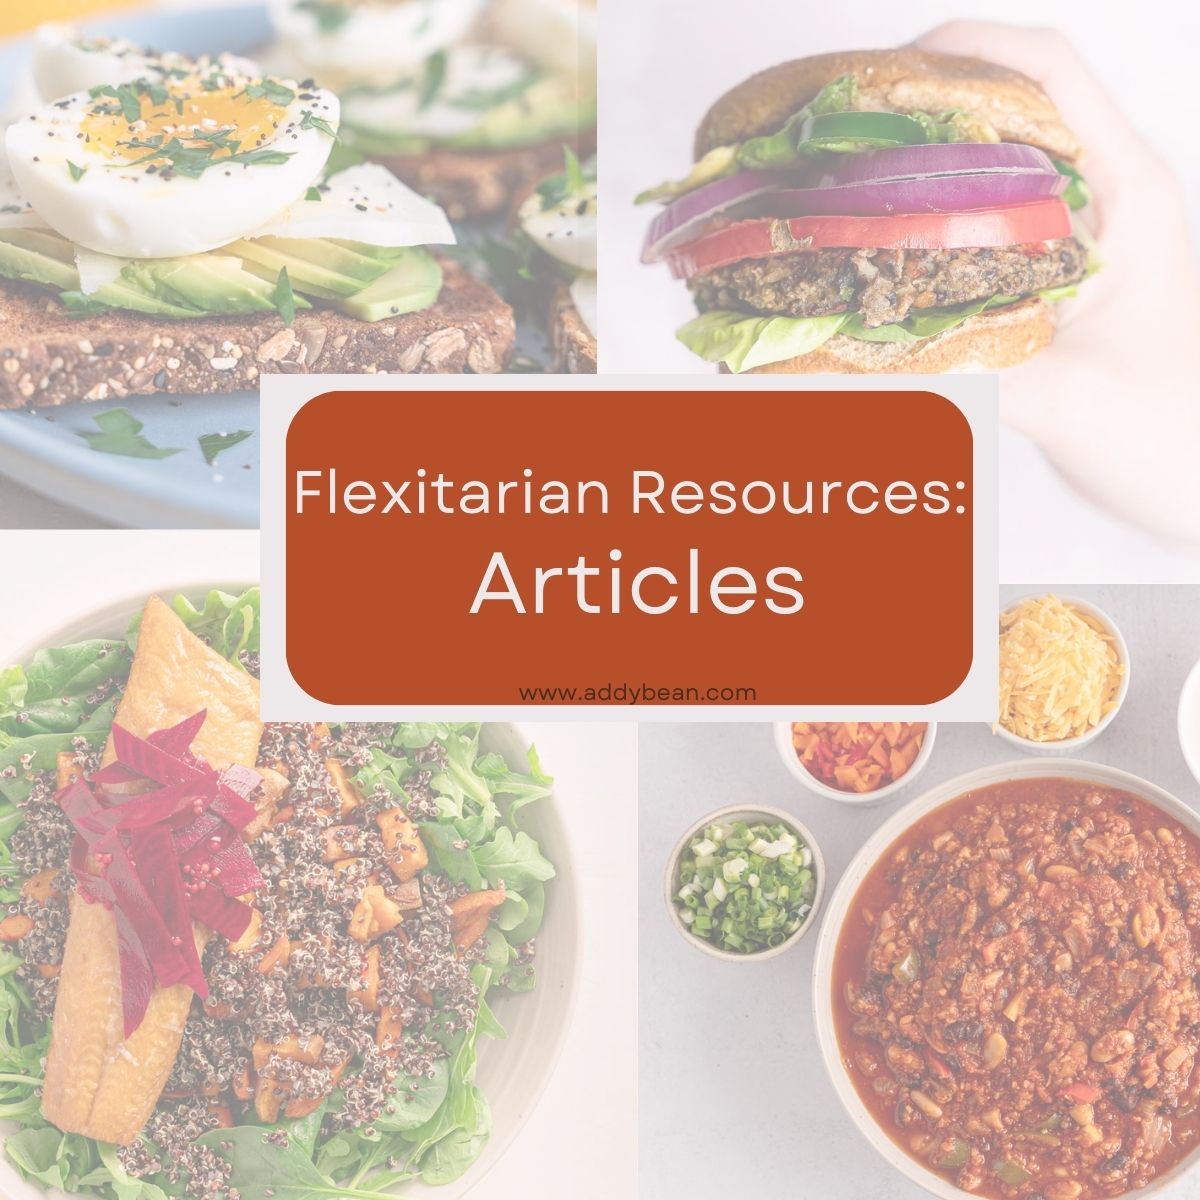 four transparent images in the corners of the image of flexitarian recipes.